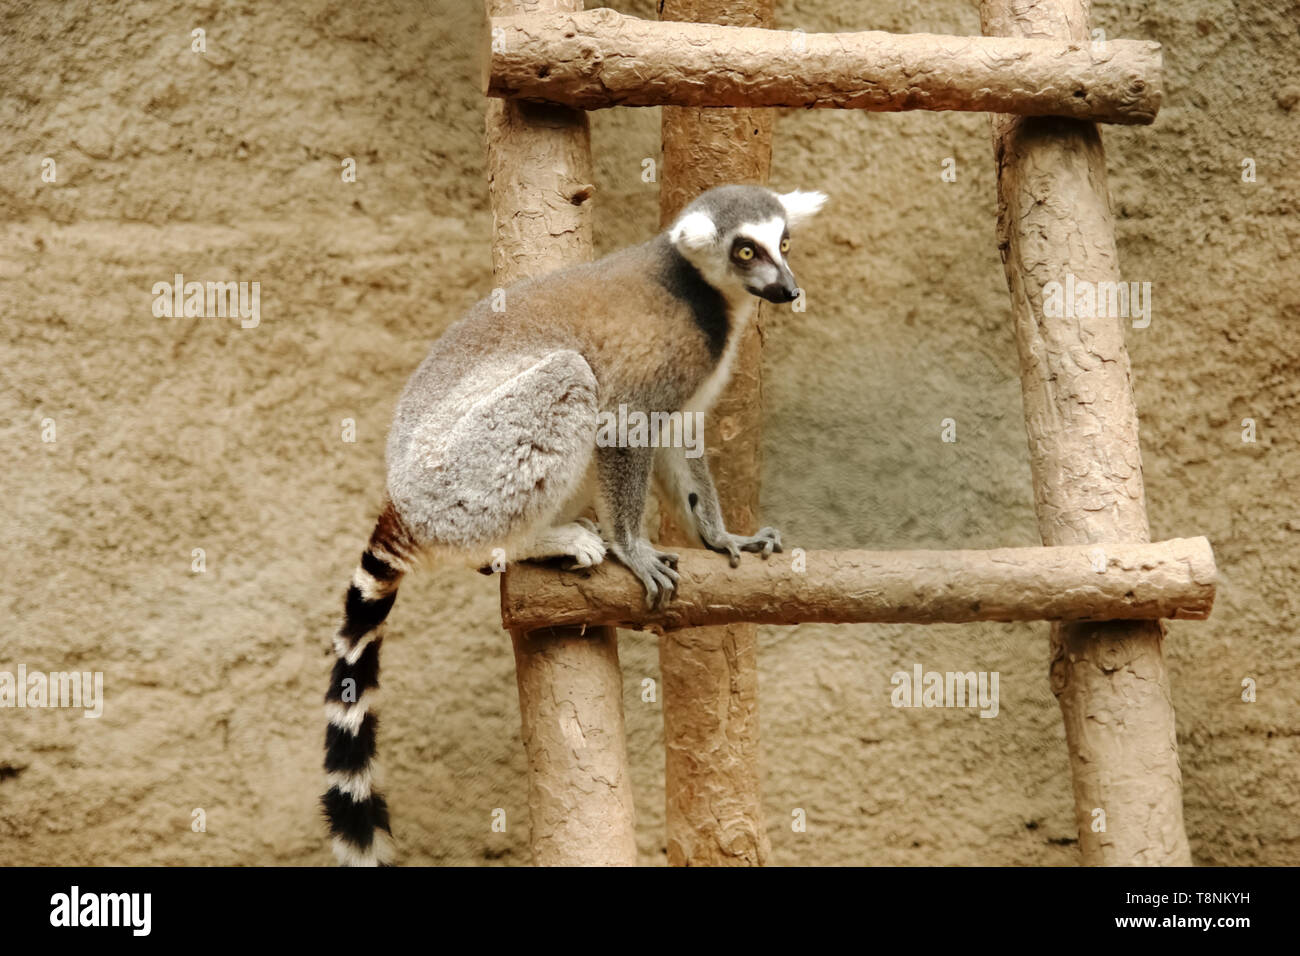 Ring-tailed lemur sitting on a wooden ladder at Izmir zoo. Stock Photo